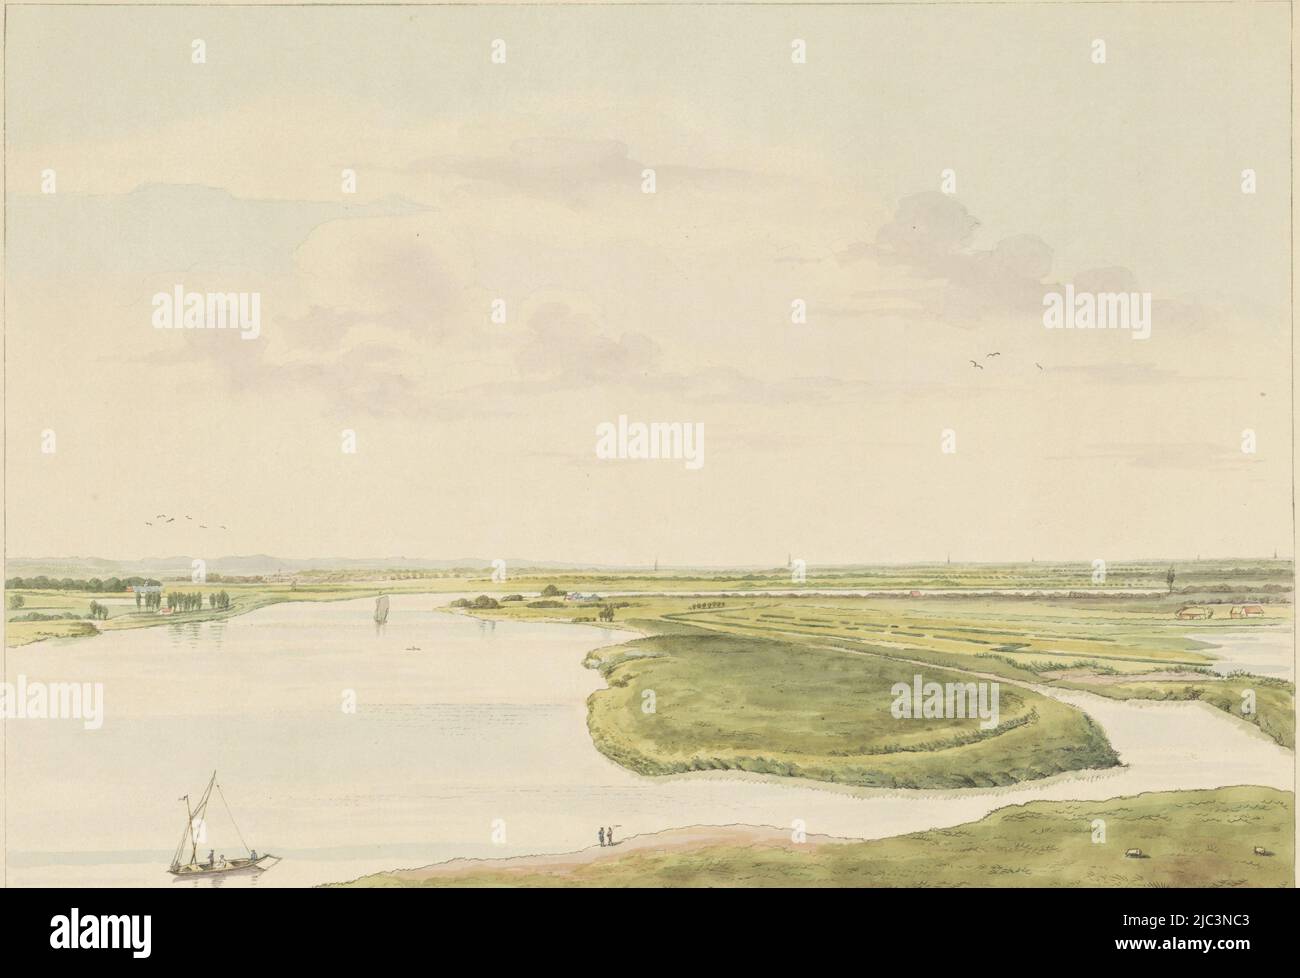 View of the river Waal. A boat can be seen on the river and a flock of sheep are grazing on the bank. The print is part of a suite of nine prints, including the title print, View of the river Waal northeast of Nijmegen Towards the north-east (title on object) Views around the city of Nijmegen (series title) Gelderland panorama or round view after life drawn on belvedere in Nymegen (series title)., print maker: Derk Anthony van de Wart, (mentioned on object), Nijmegen, 1815 - 1824, paper, etching, brush, h 317 mm × w 363 mm Stock Photo